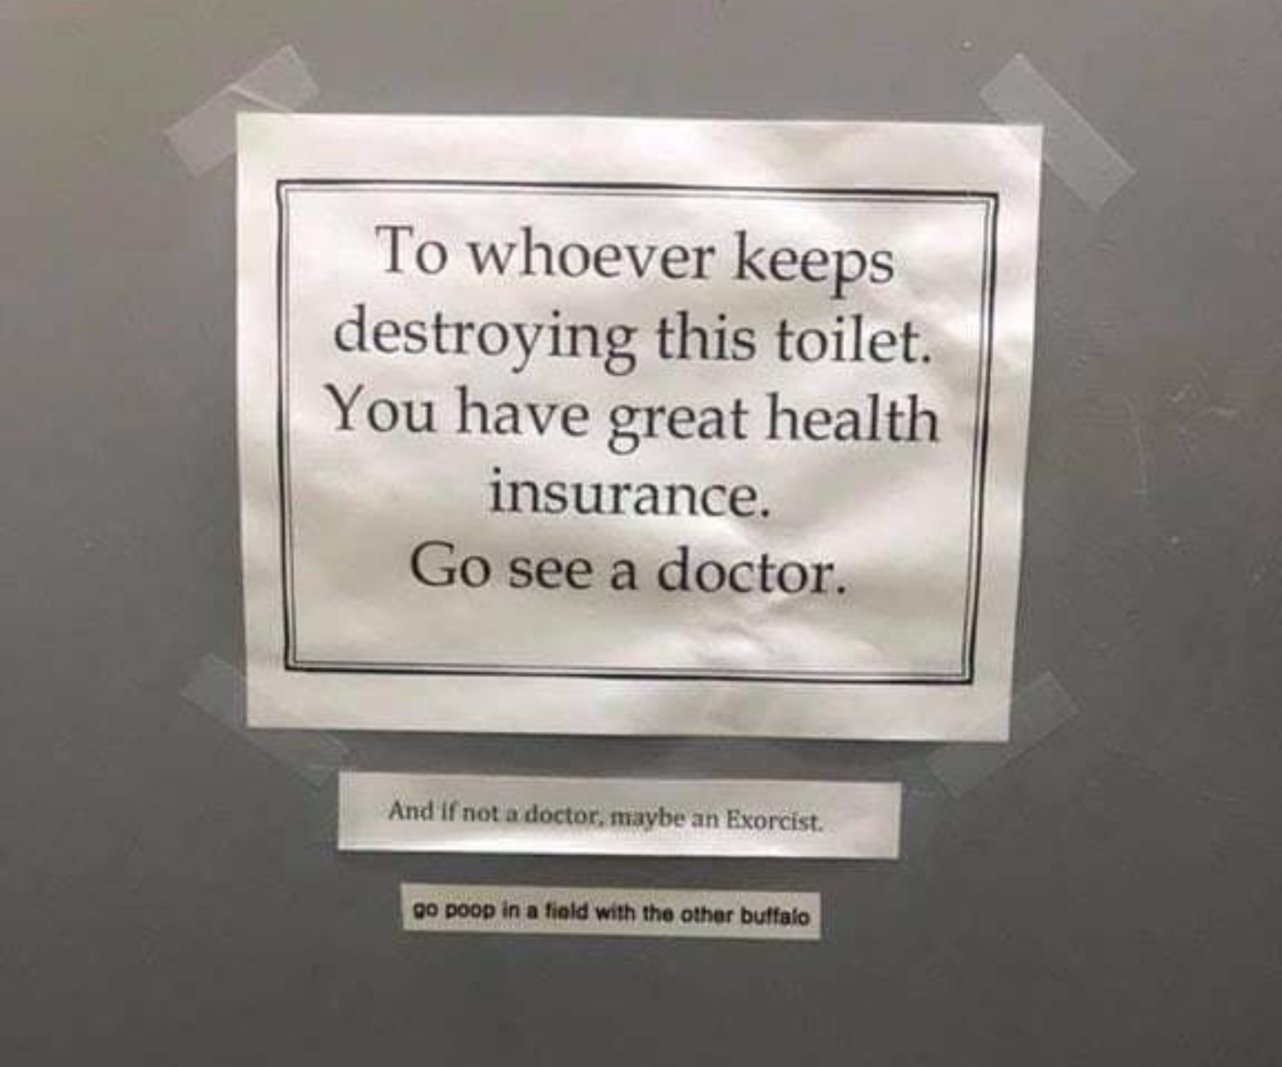 poop with the other buffalo - To whoever keeps destroying this toilet. You have great health insurance. Go see a doctor. And if not a doctor, maybe an Exorcist. go poop in a field with the other buffalo